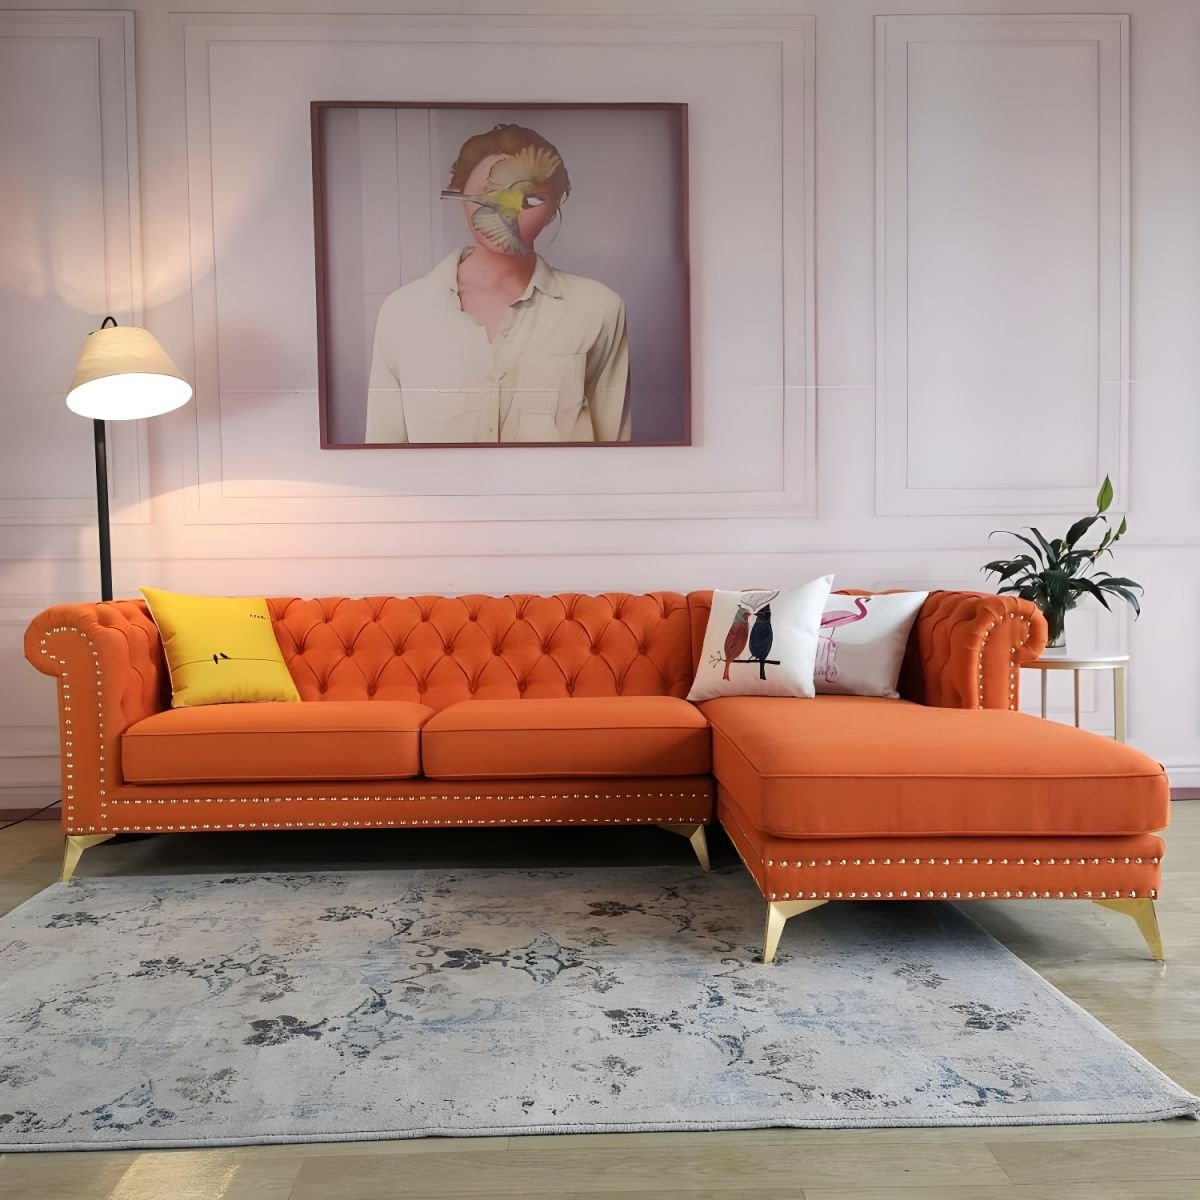 Glamorous Tufted L-Shape Sectional Sofa with Round Arm and Nailhead Trim - Orange Cotton and Linen Right